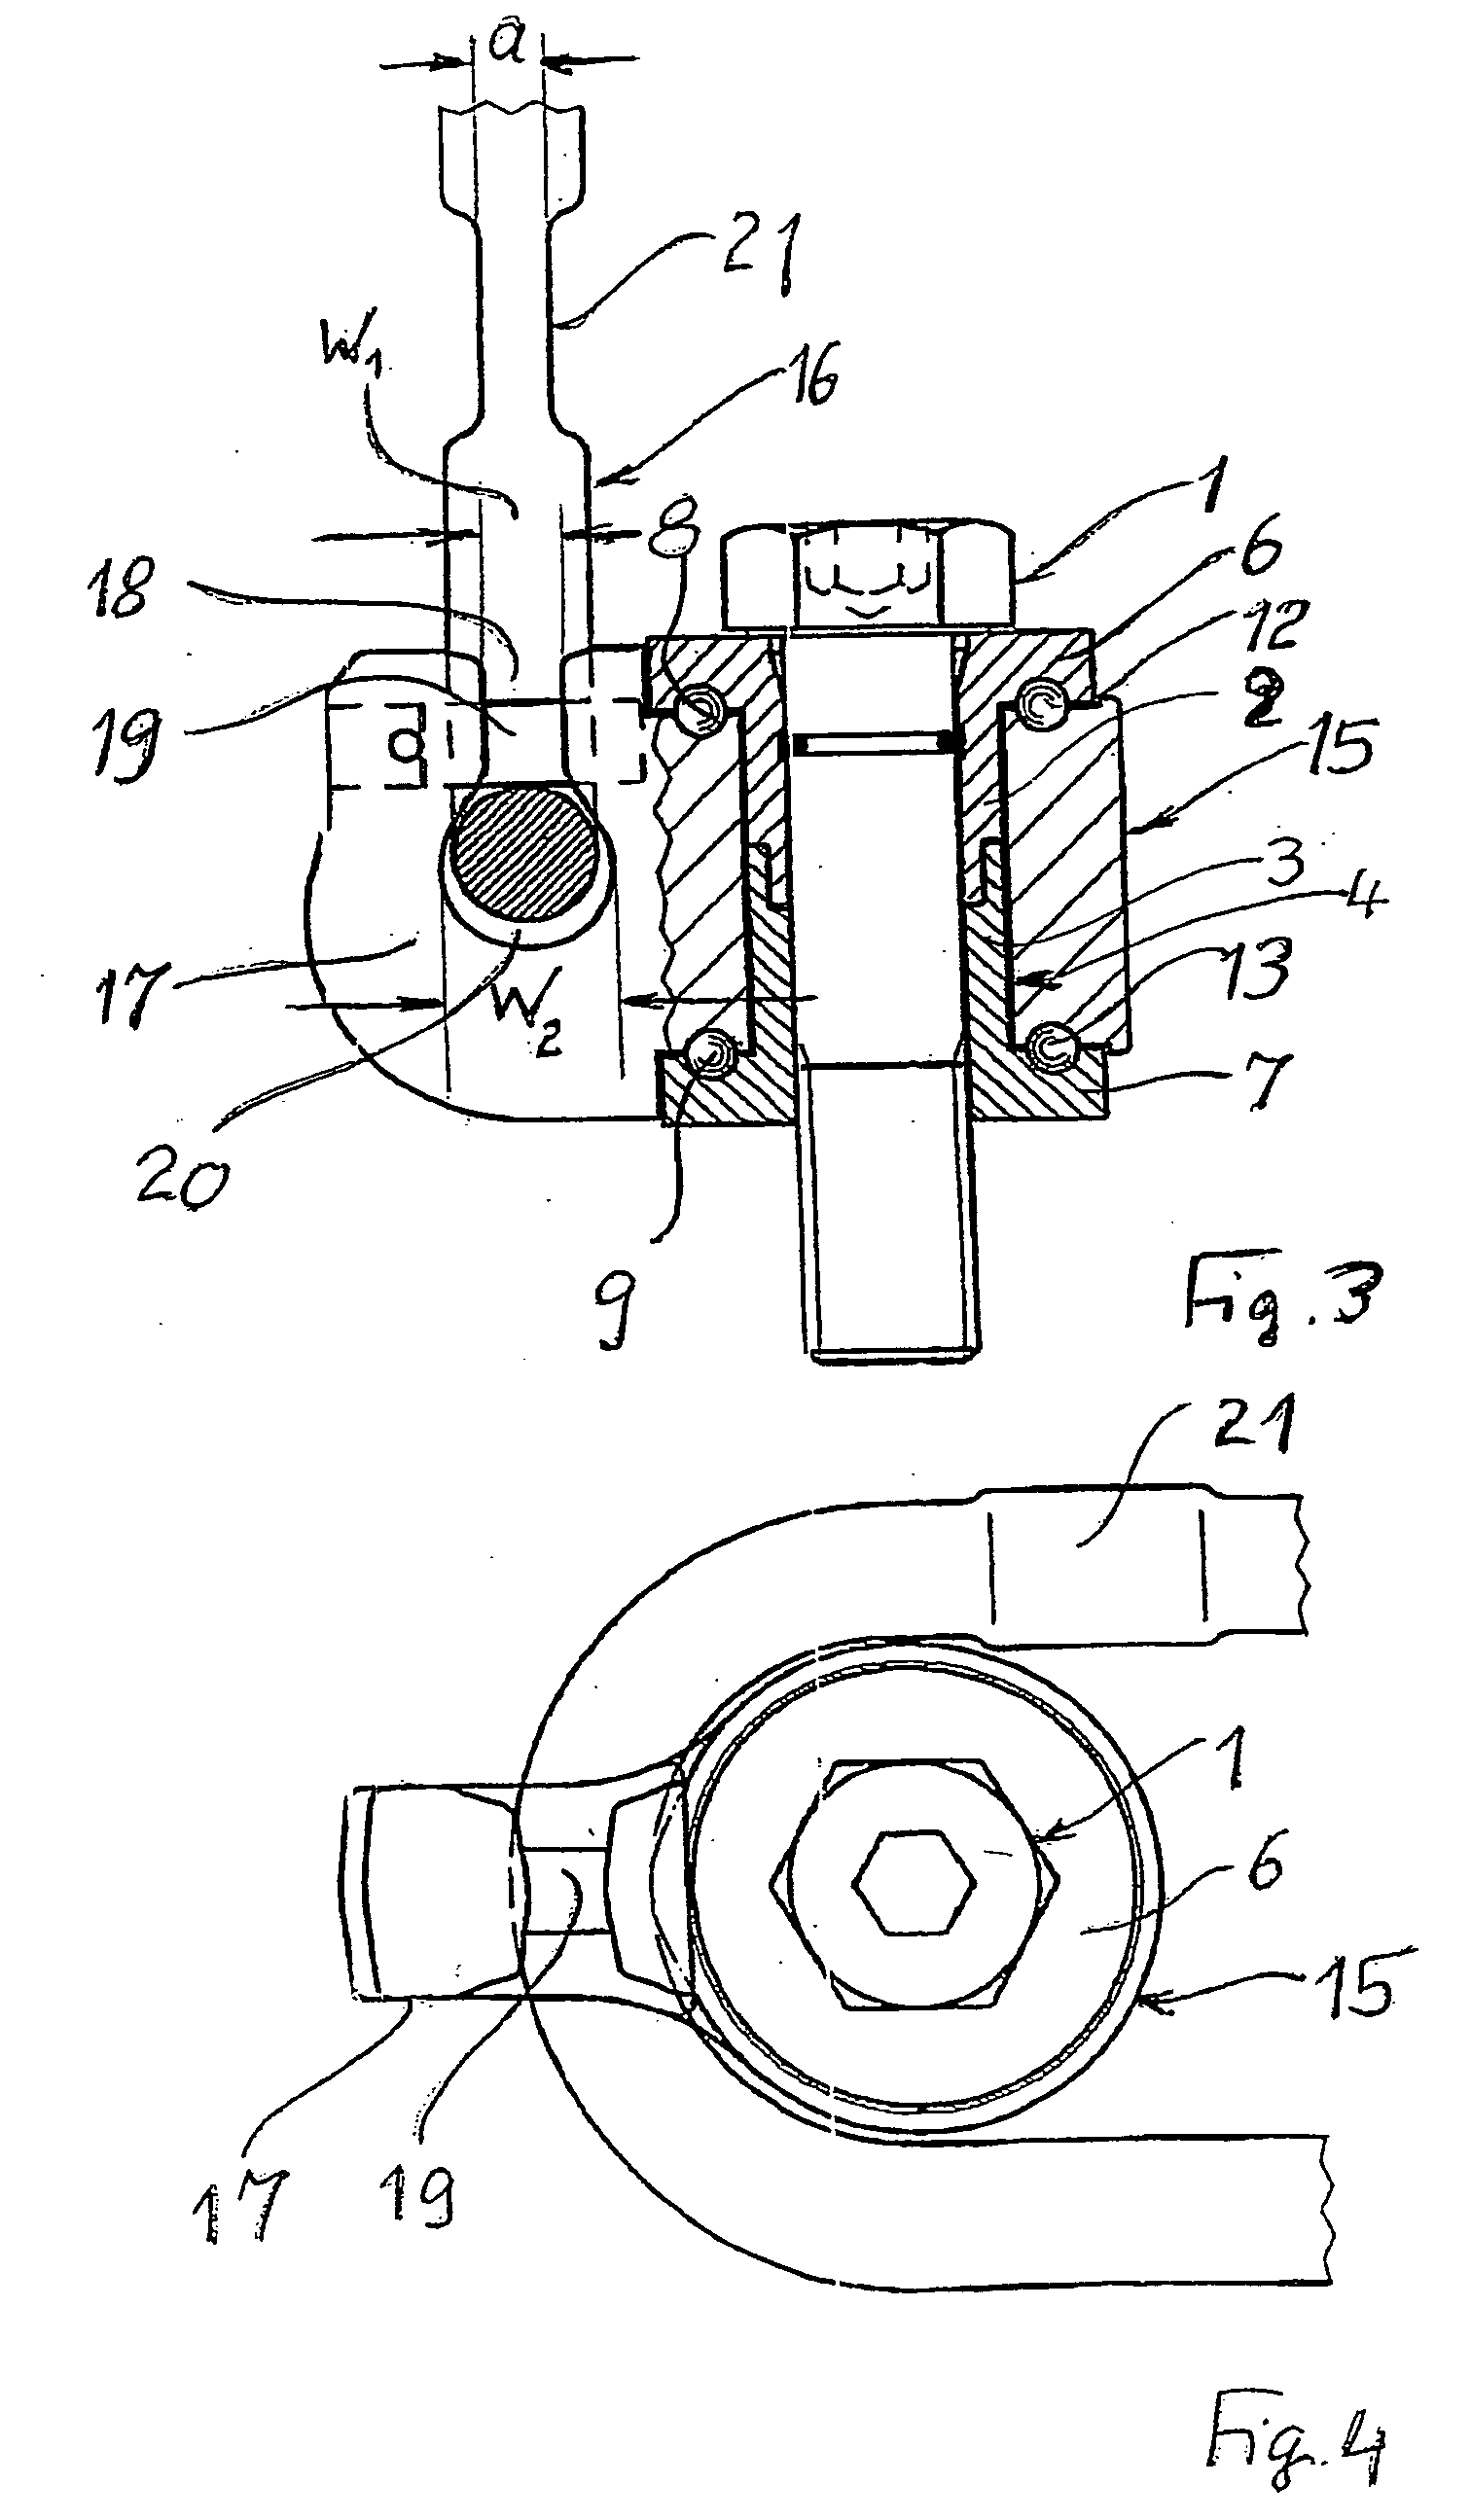 Attaching device for attaching stopping or lashing means